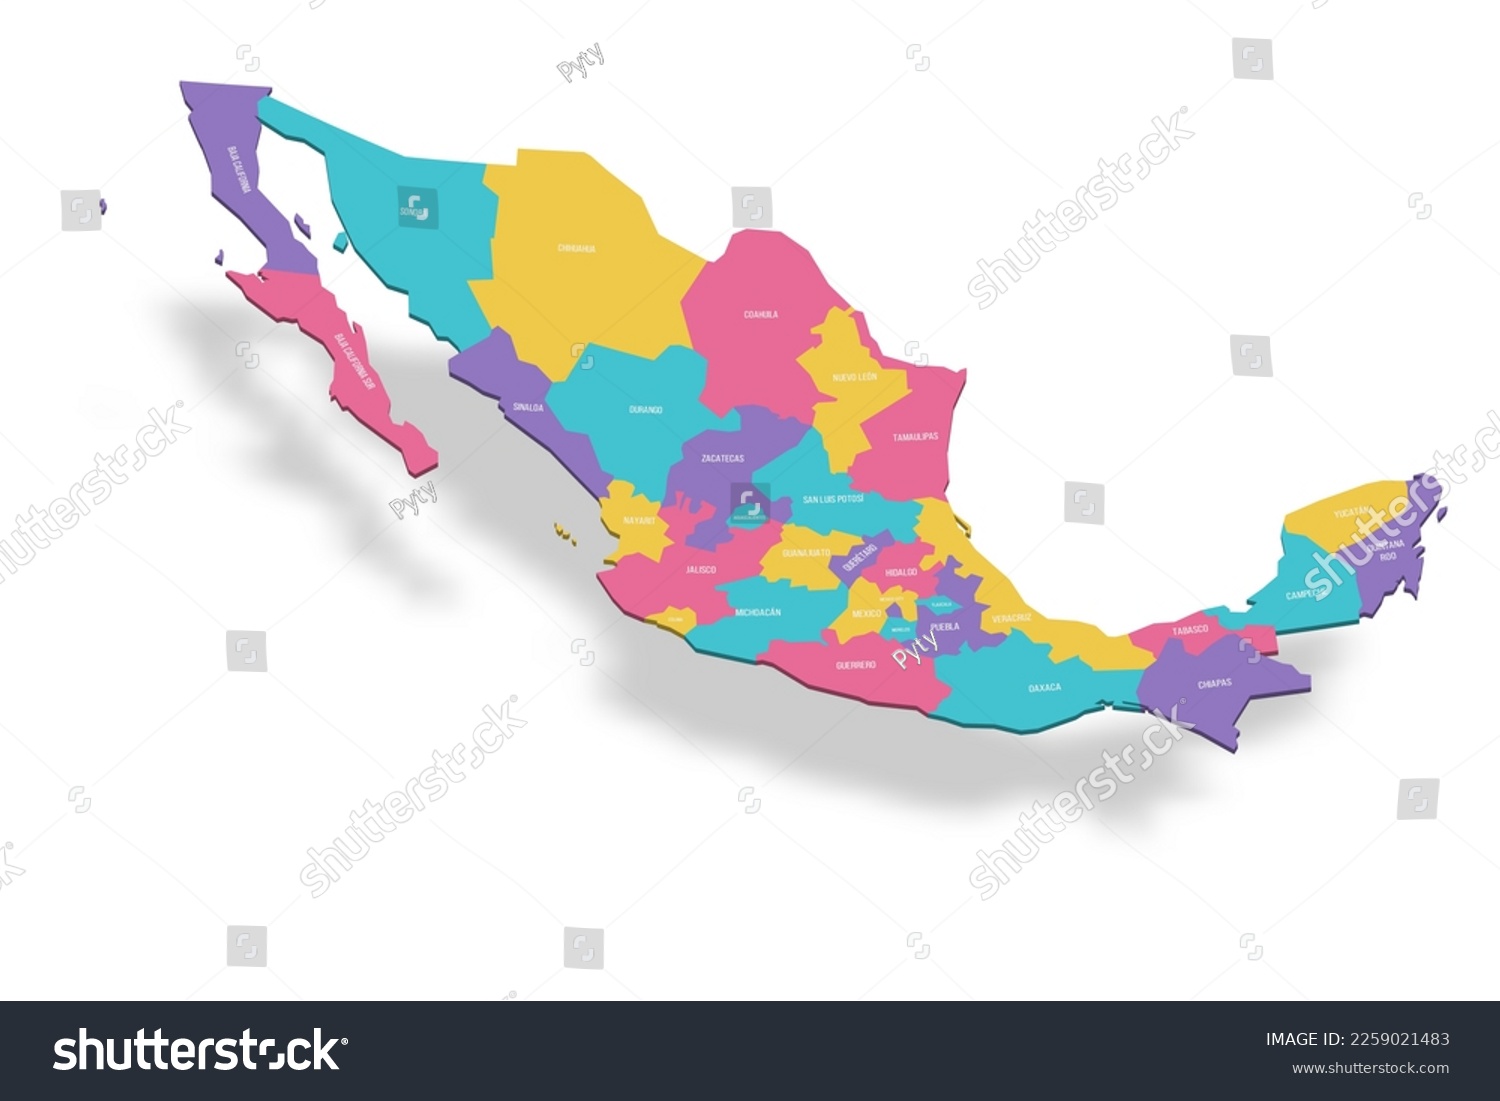 Mexico Political Map Of Administrative Divisions Royalty Free Stock Vector 2259021483 3186